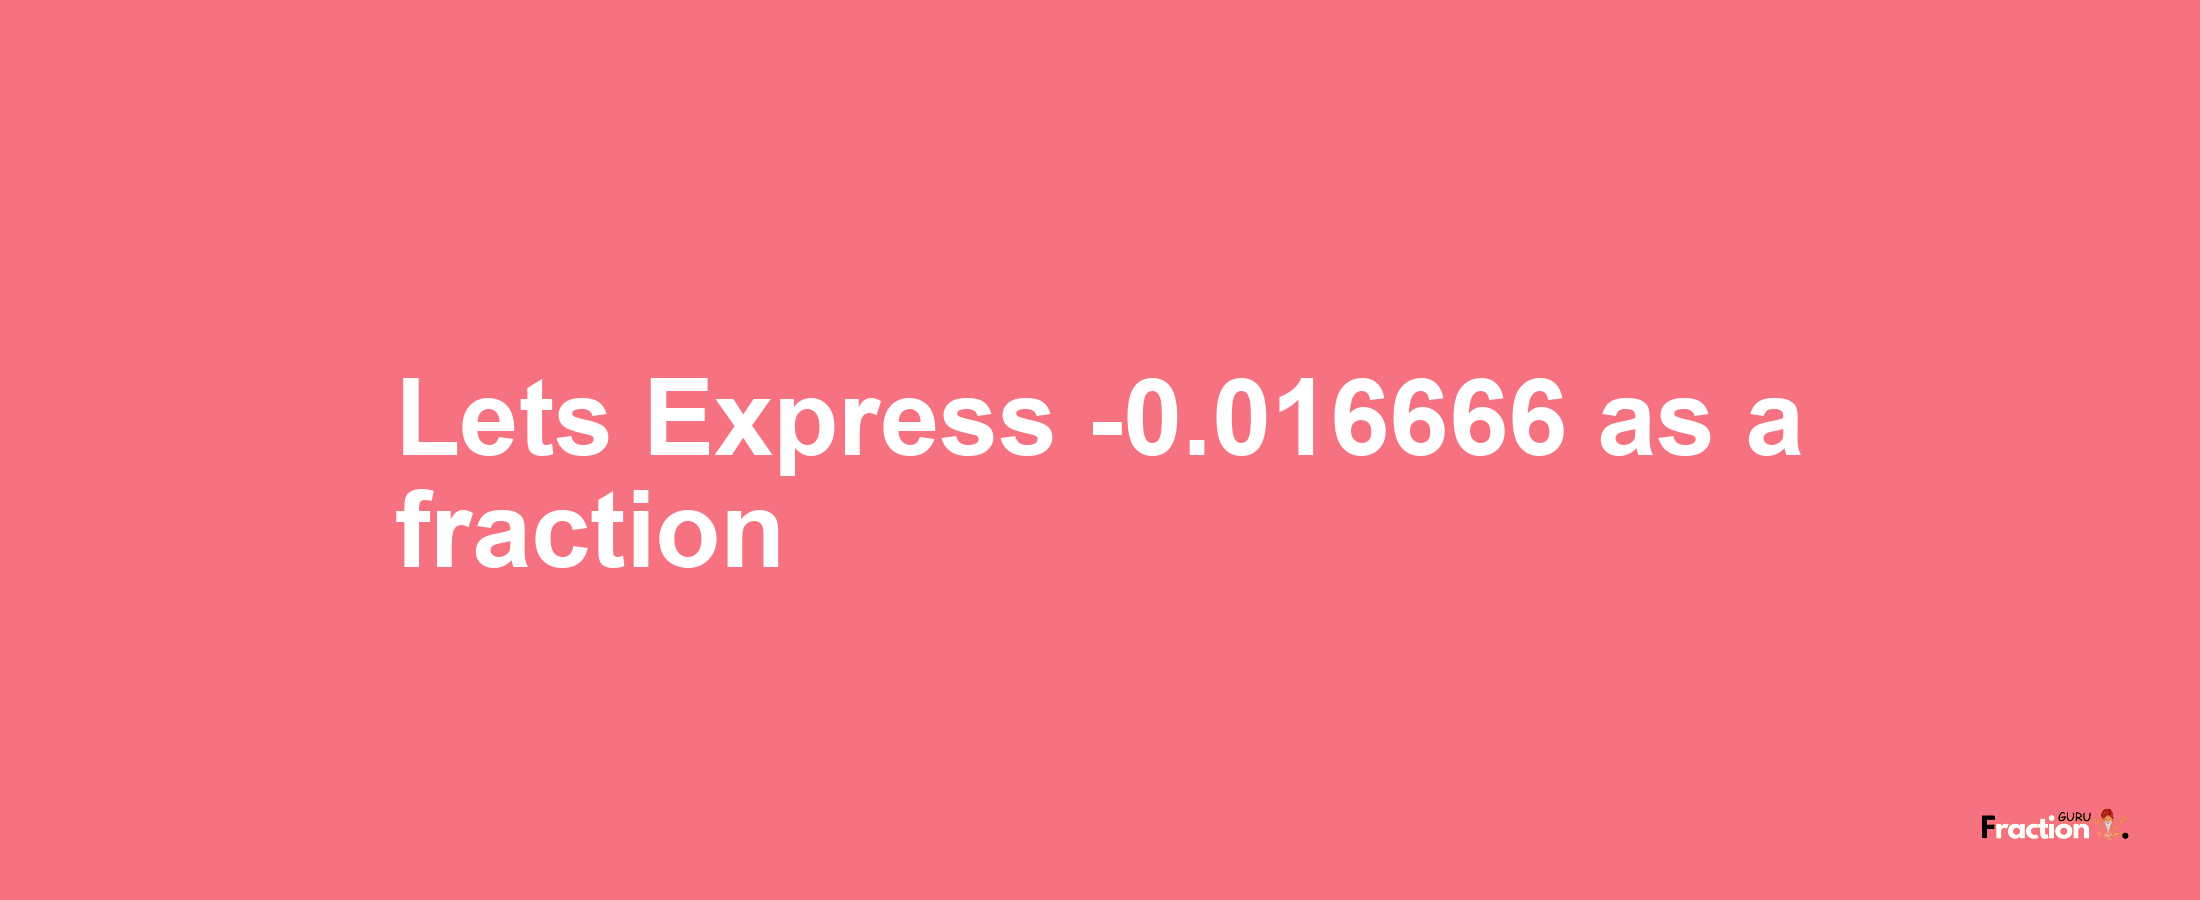 Lets Express -0.016666 as afraction